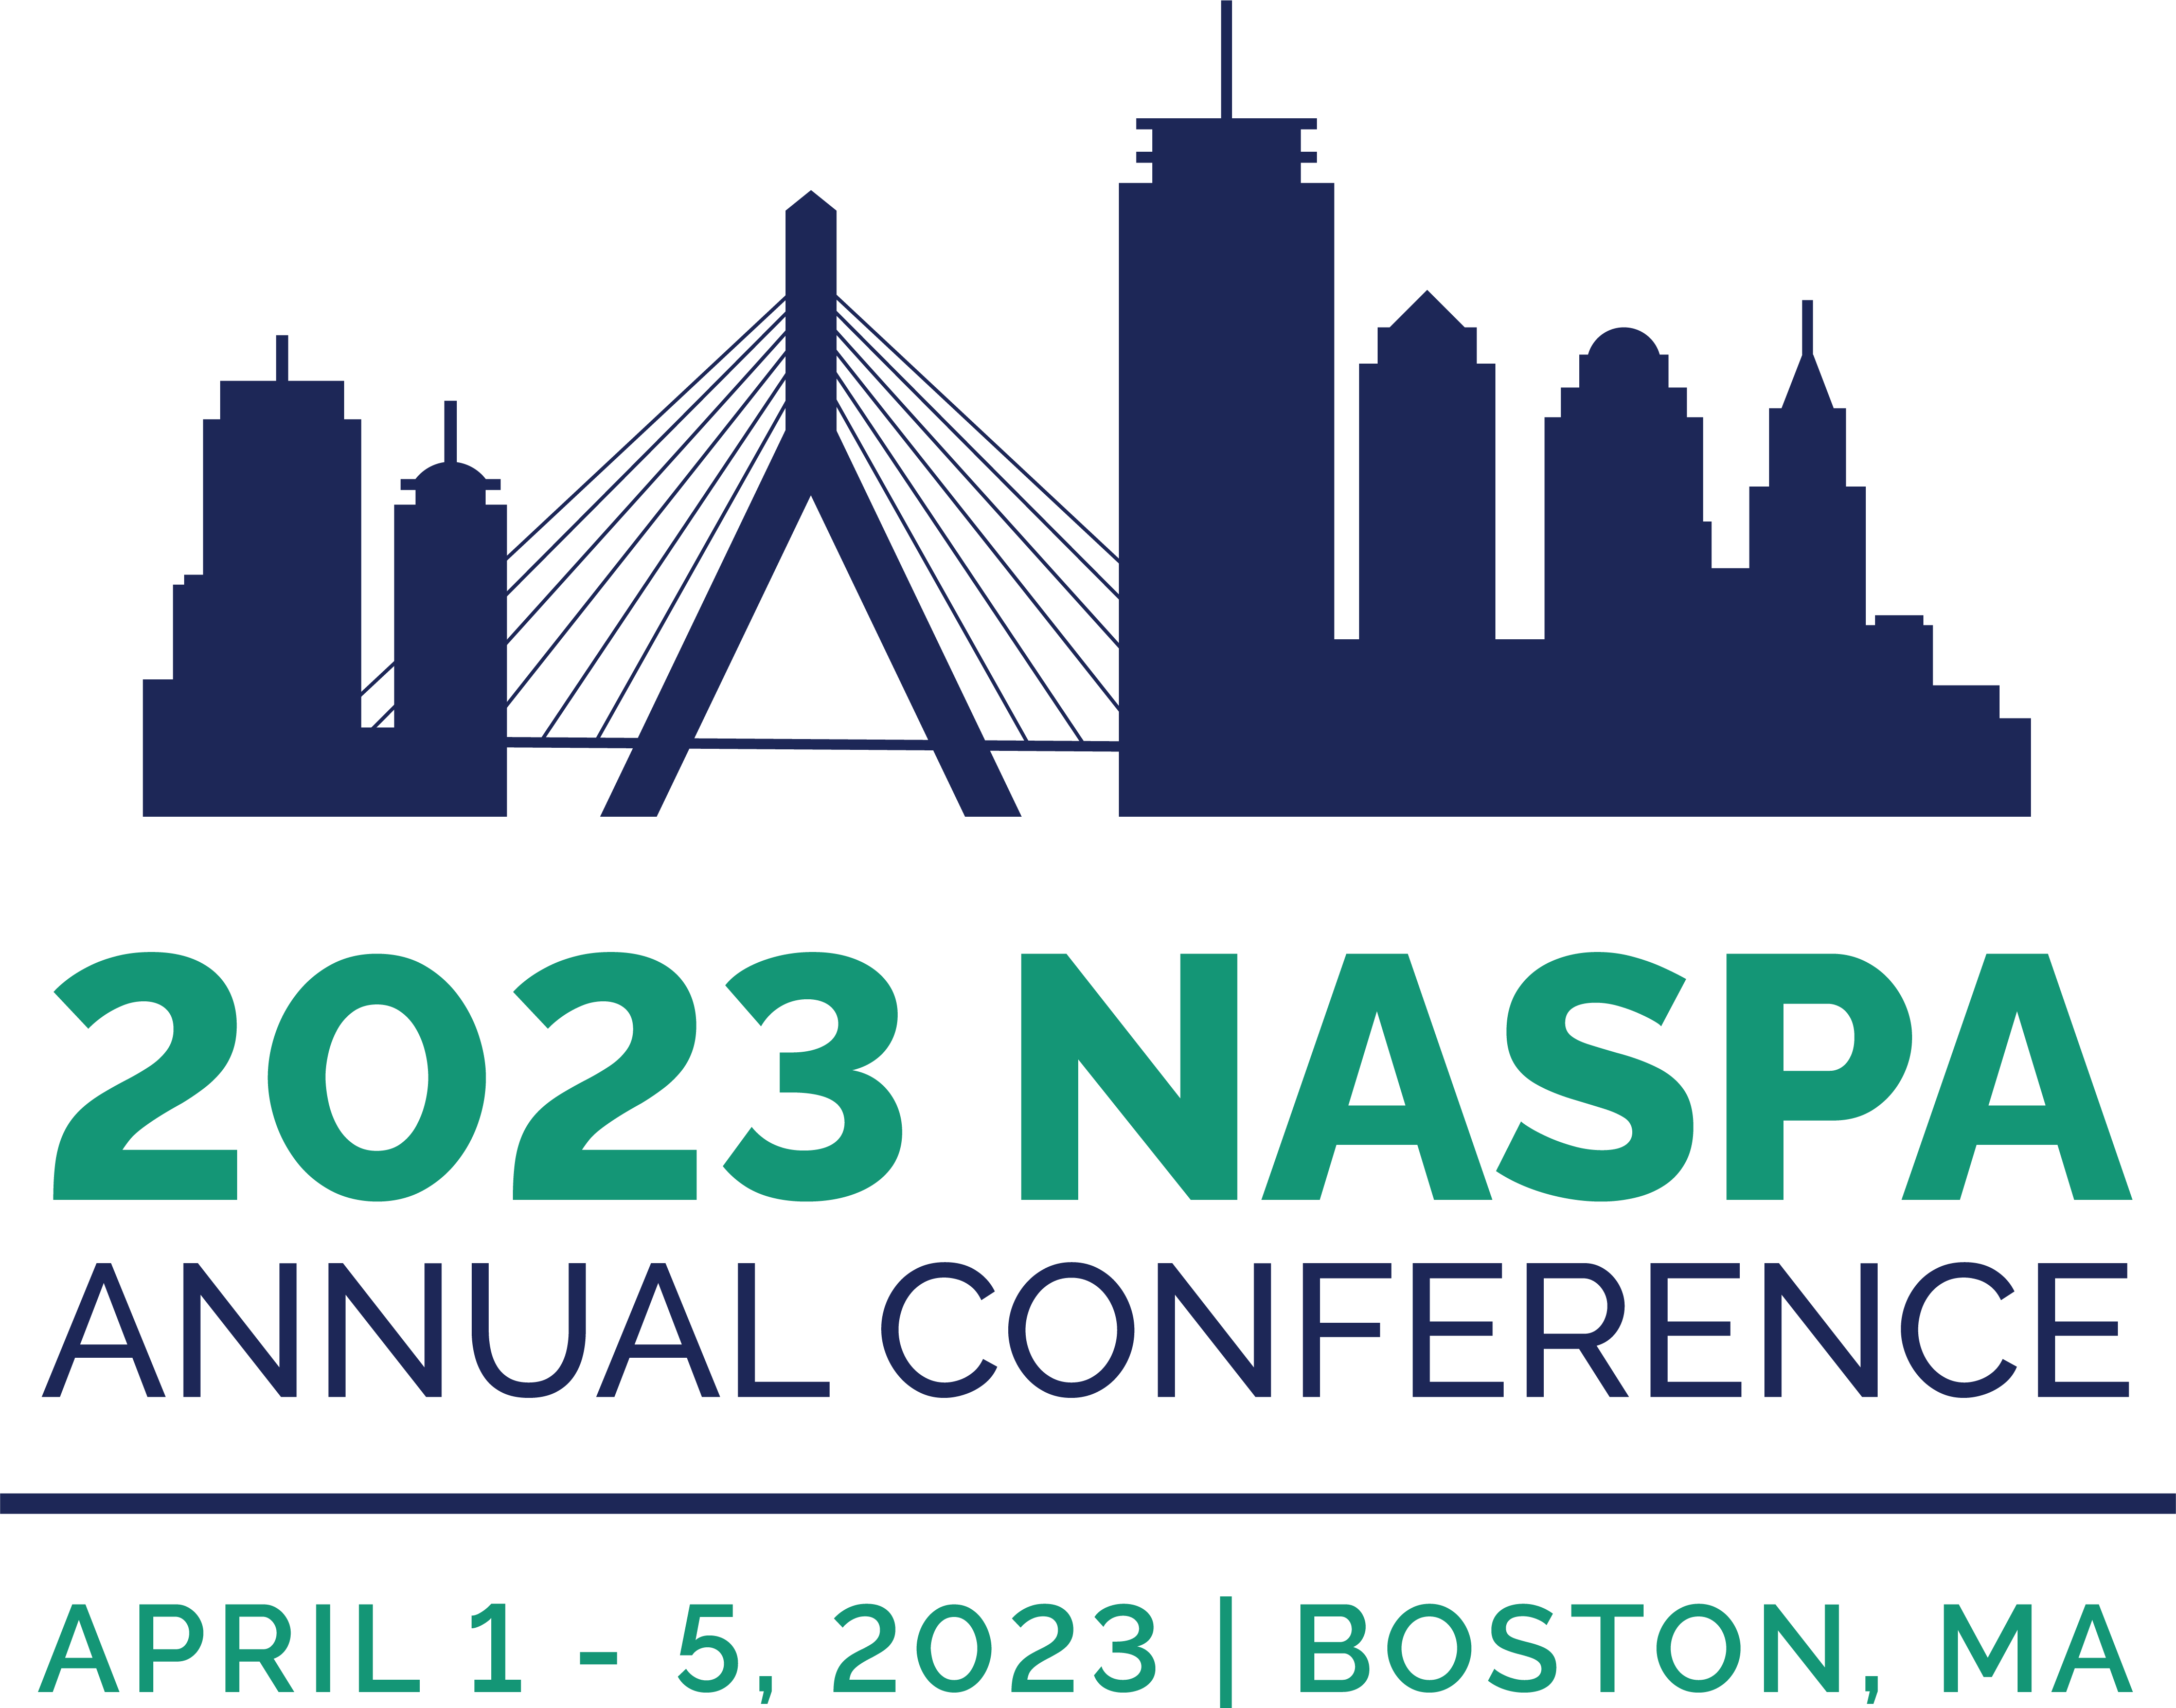 Naesp Conference 2023 - 2023